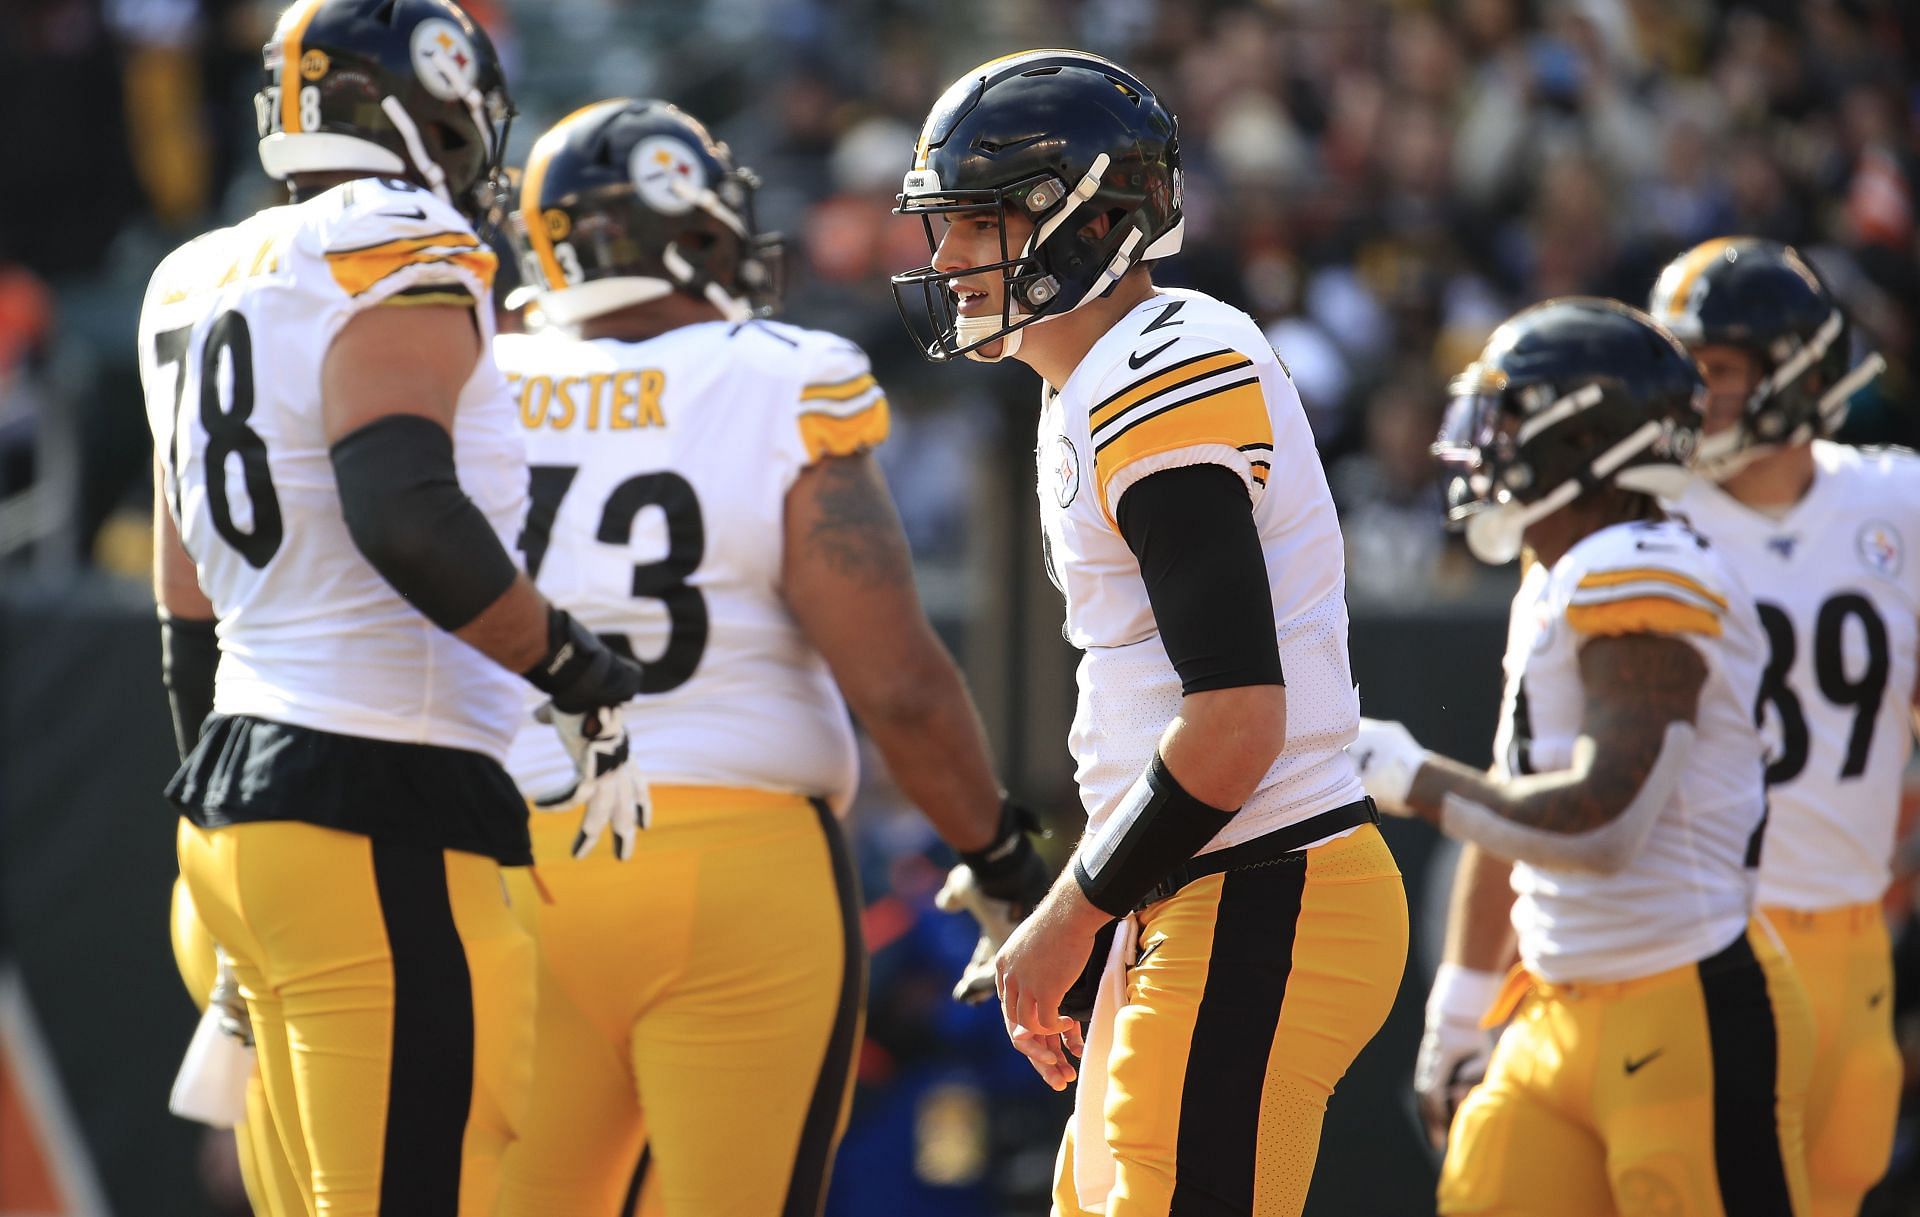 The Steelers could potentially have several starter-level QBs